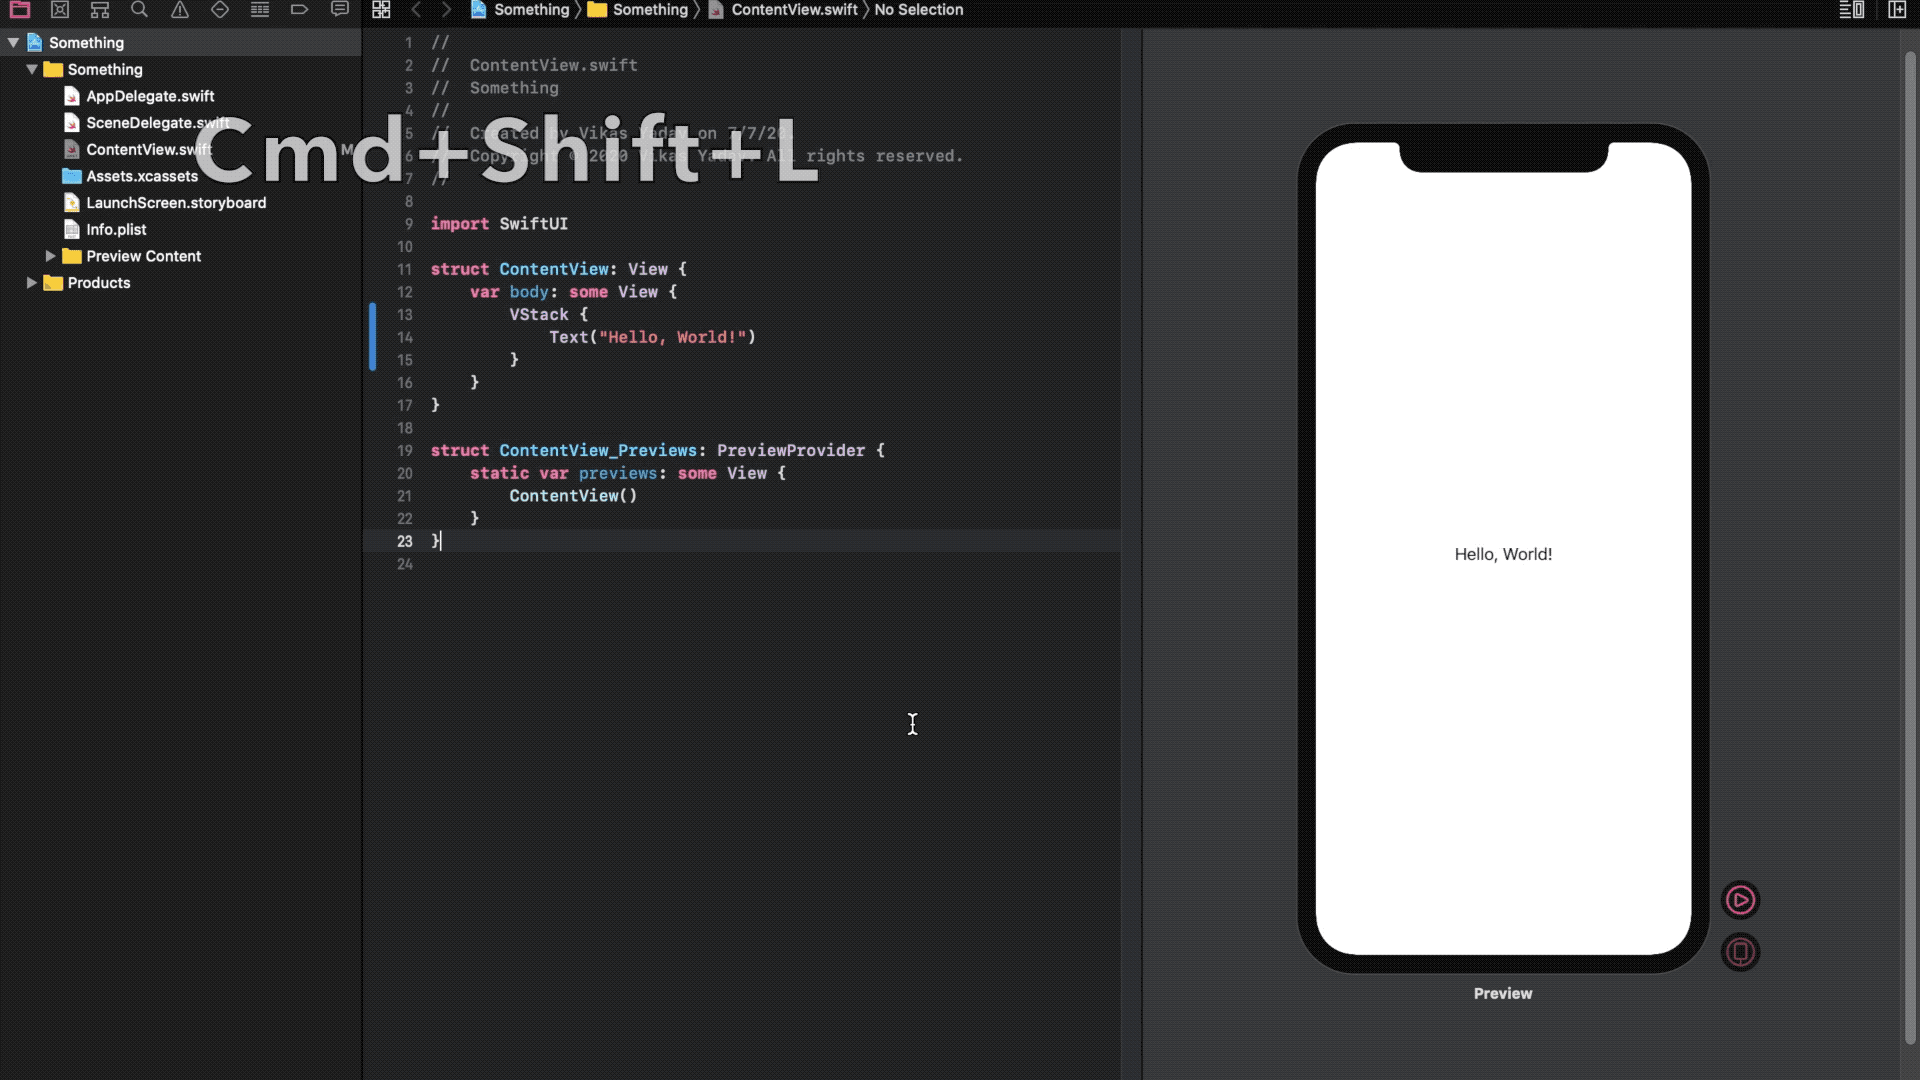 SwiftUI comes with built-in design tools